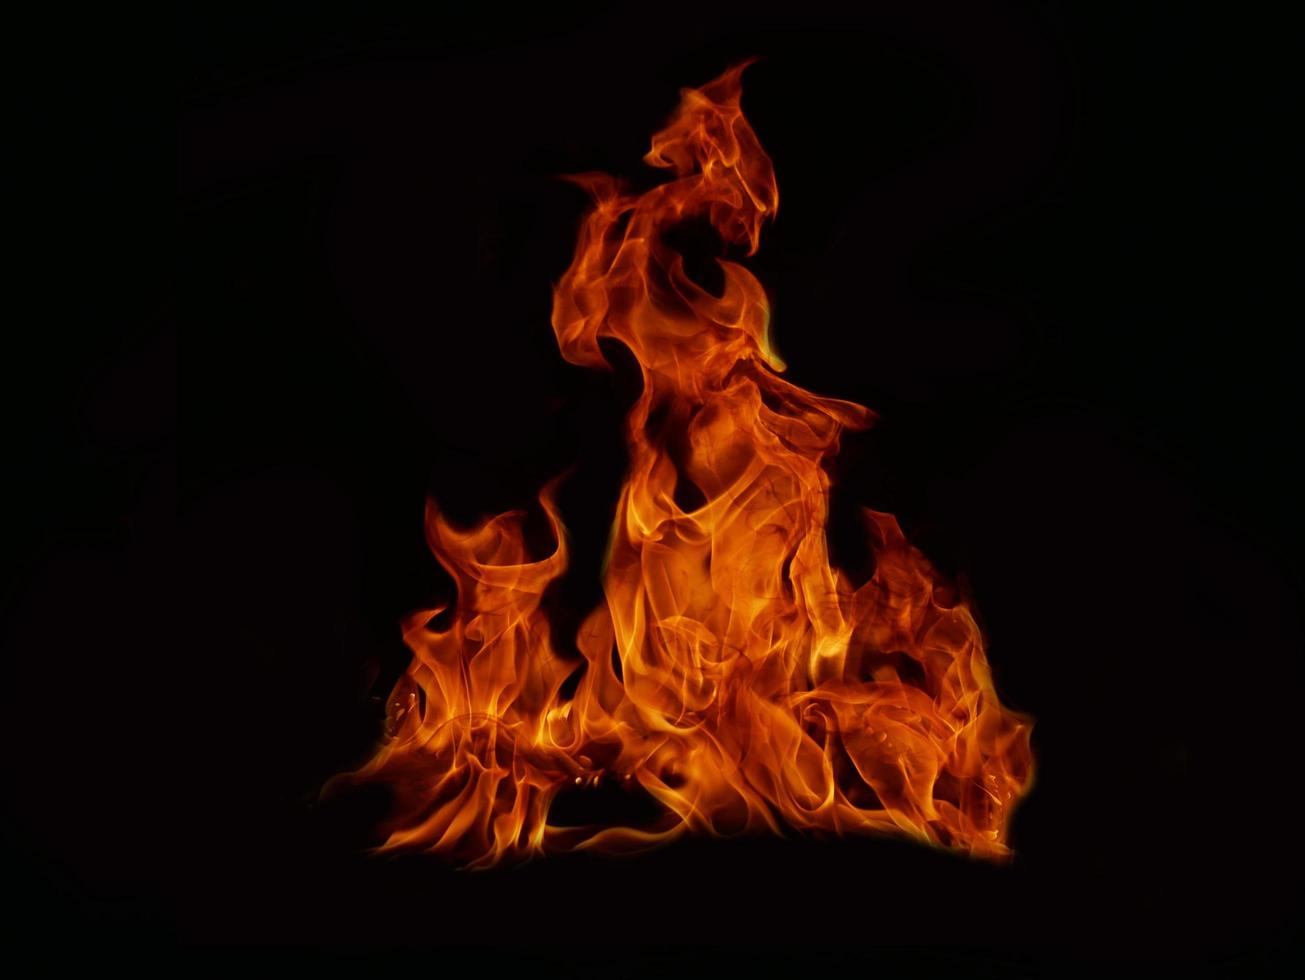 Flame Flame Texture For Strange Shape Fire Background Flame meat that is burned from the stove or from cooking. danger feeling abstract black background Suitable for banners or advertisements. photo